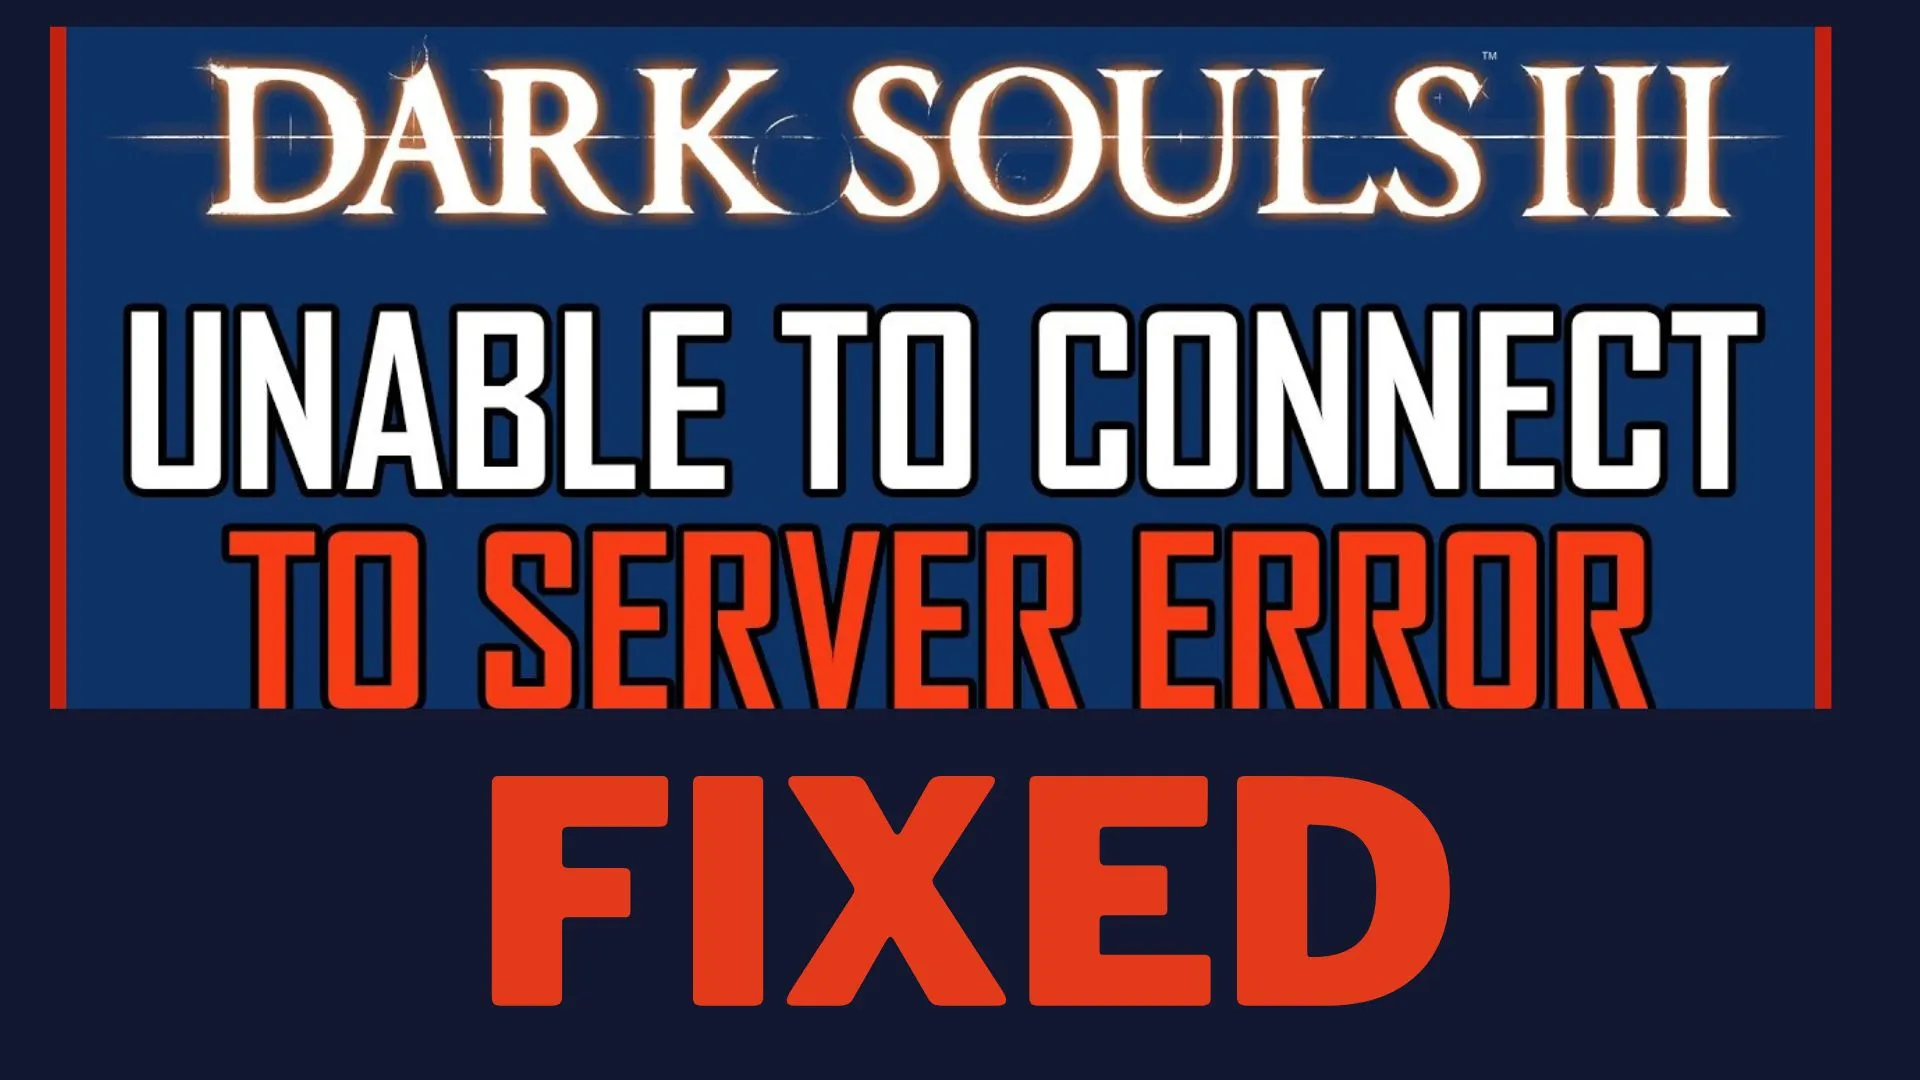 Lost Ark cannot connect to the server